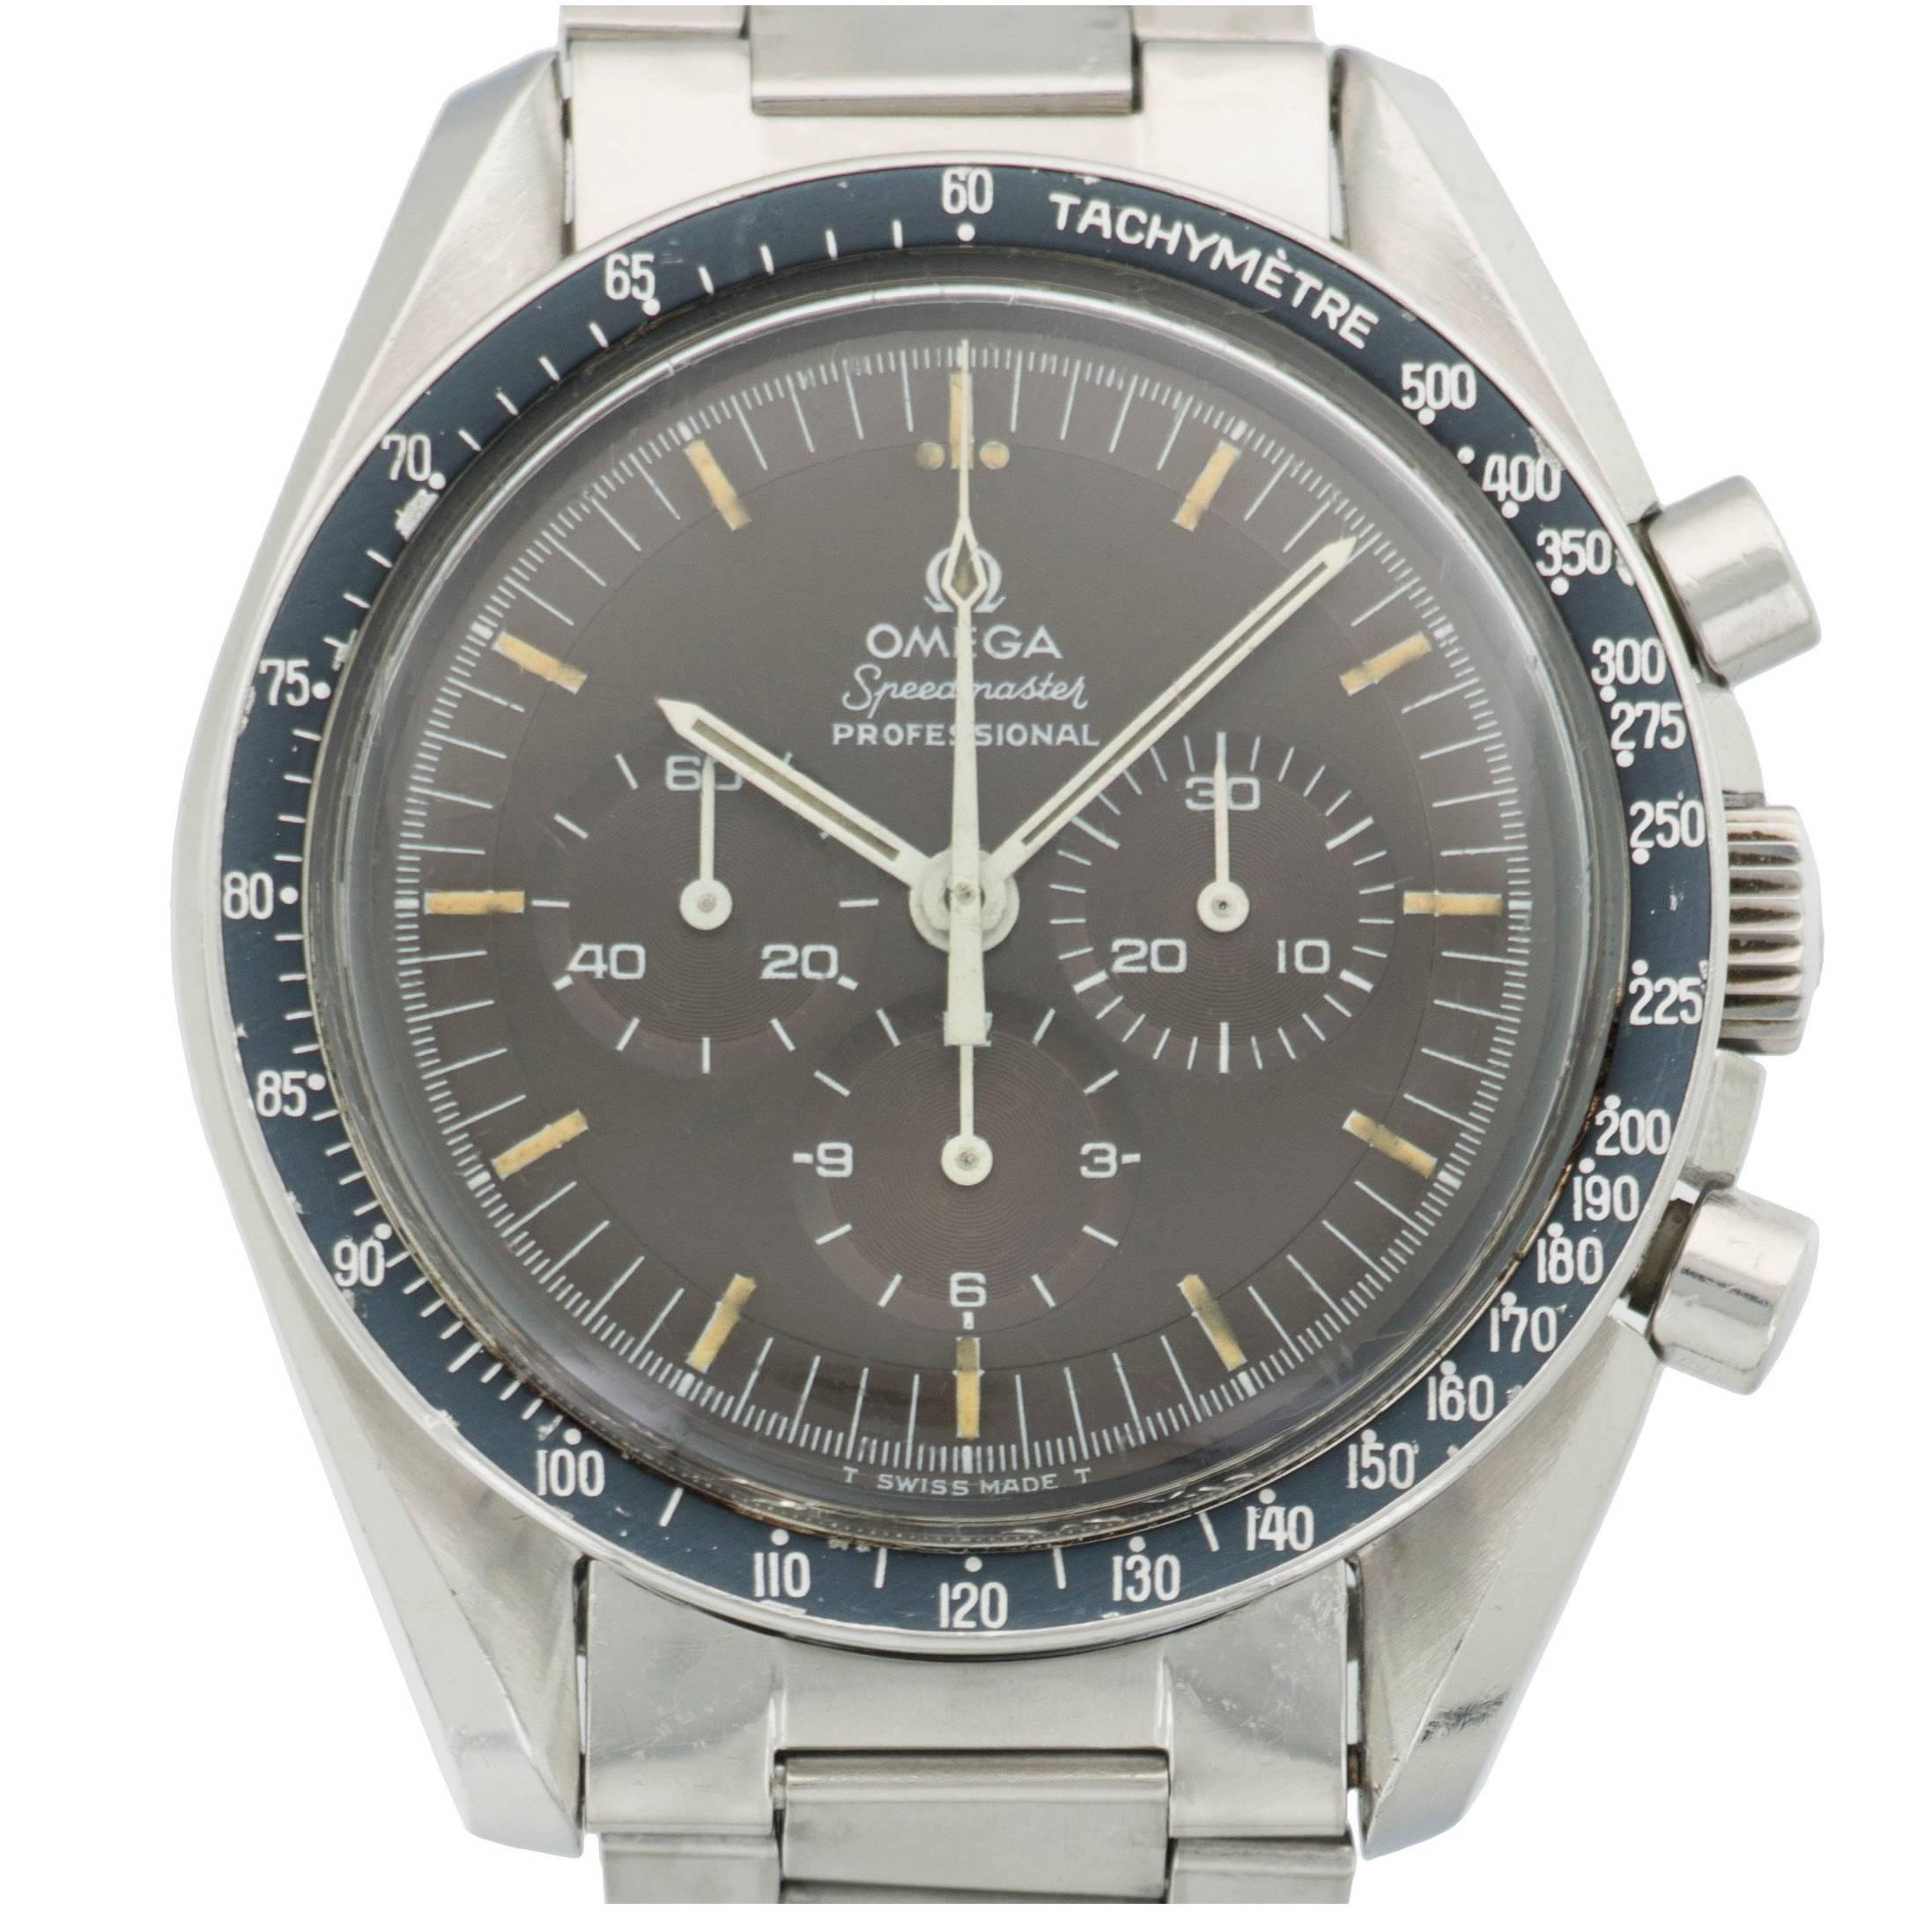 Omega Stainless Steel Tropical Speedmaster Wristwatch Ref 145.022 For Sale